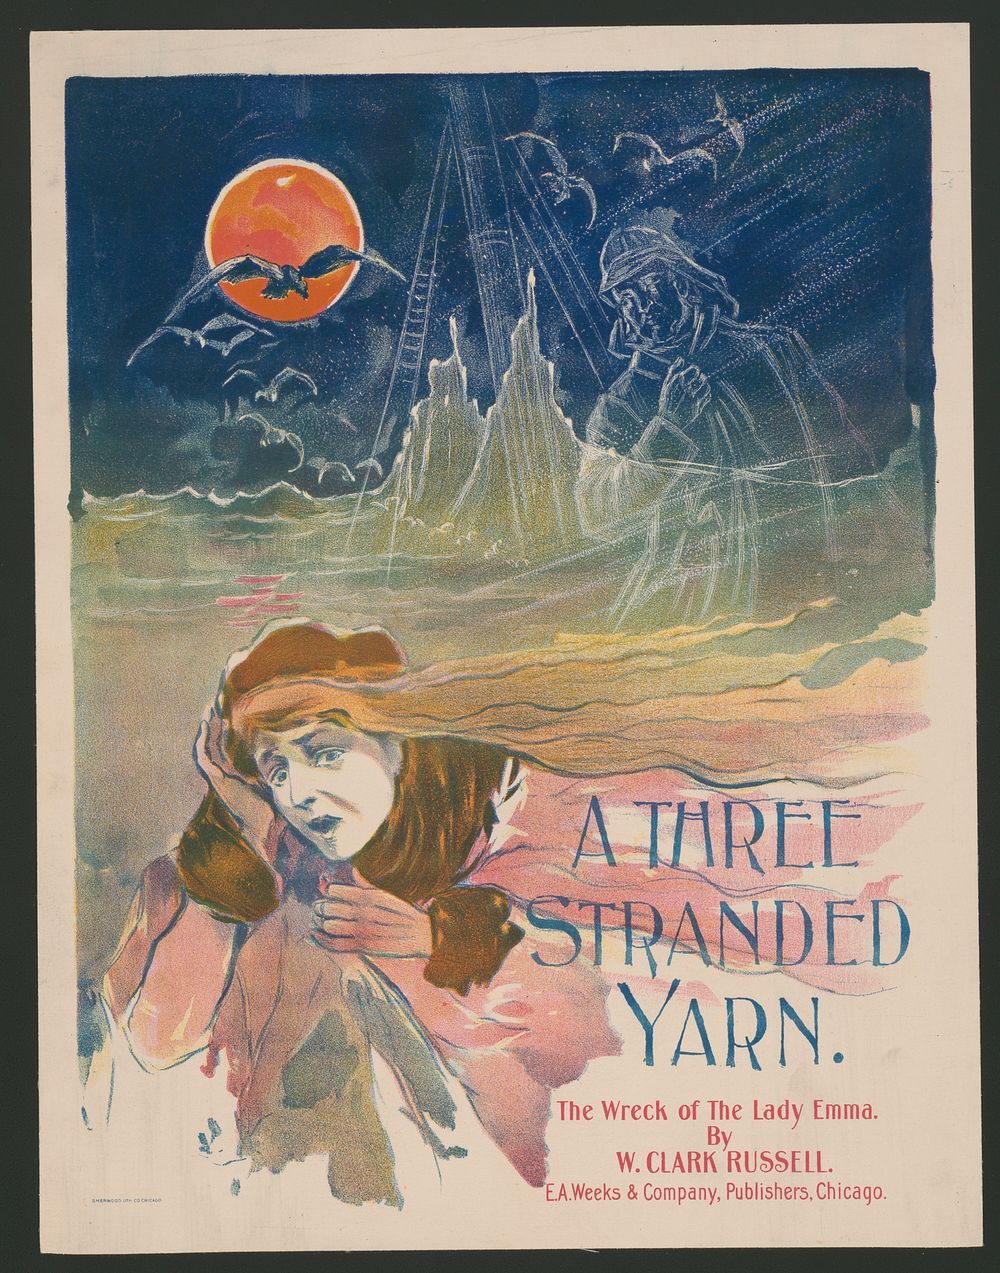 A three stranded yarn : the wreck of the Lady Emma by W. Clark Russell